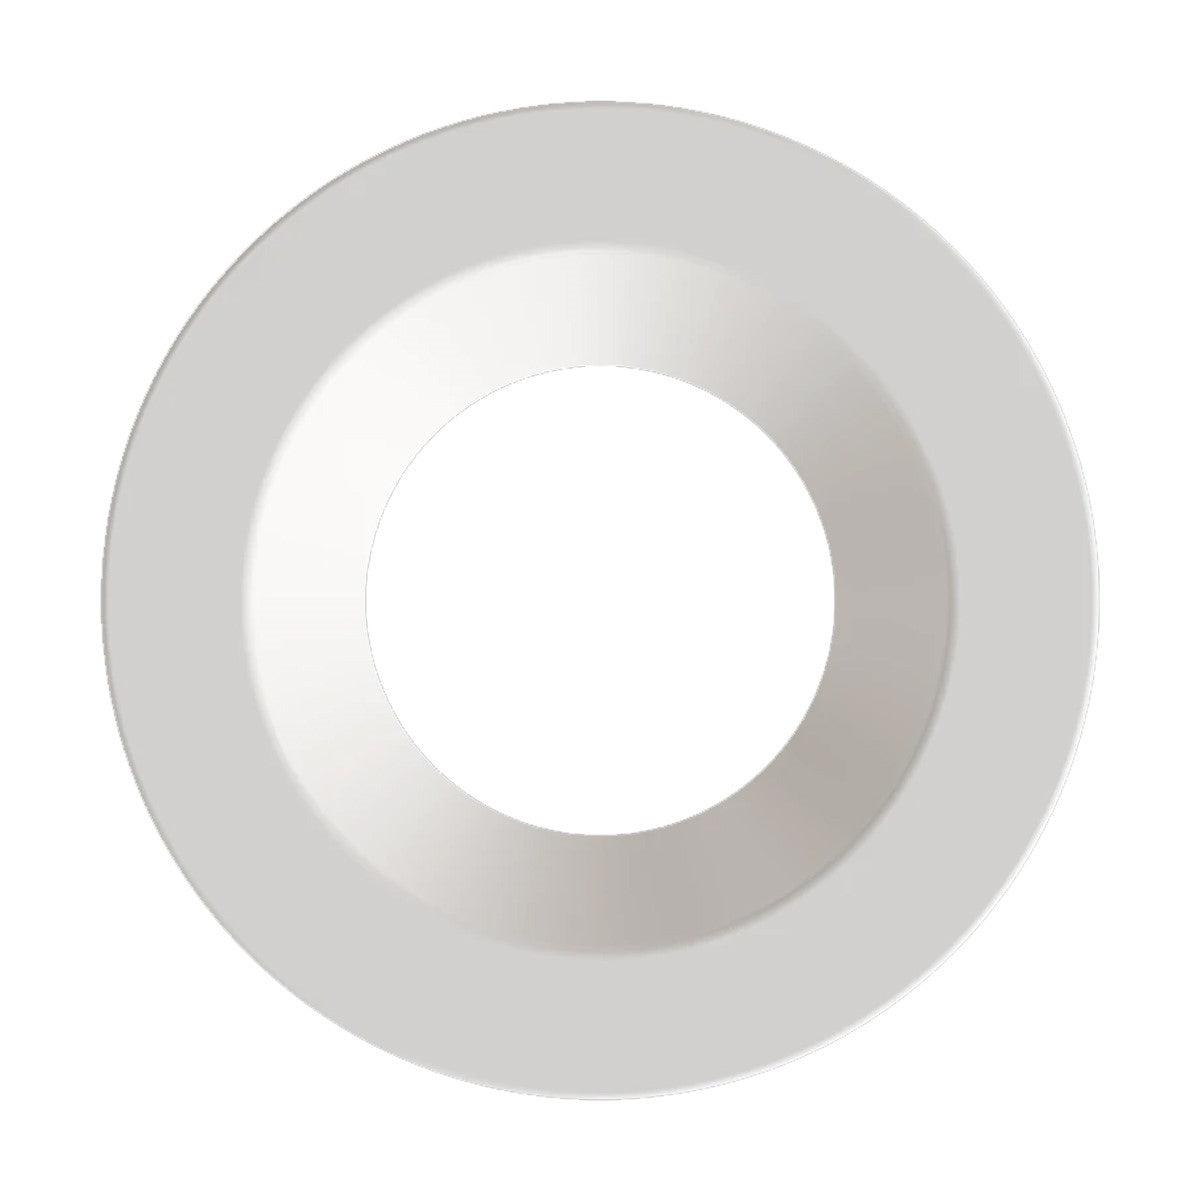 RAB 4 Inch Round White / Smooth Trim for HA4 Series - Bees Lighting